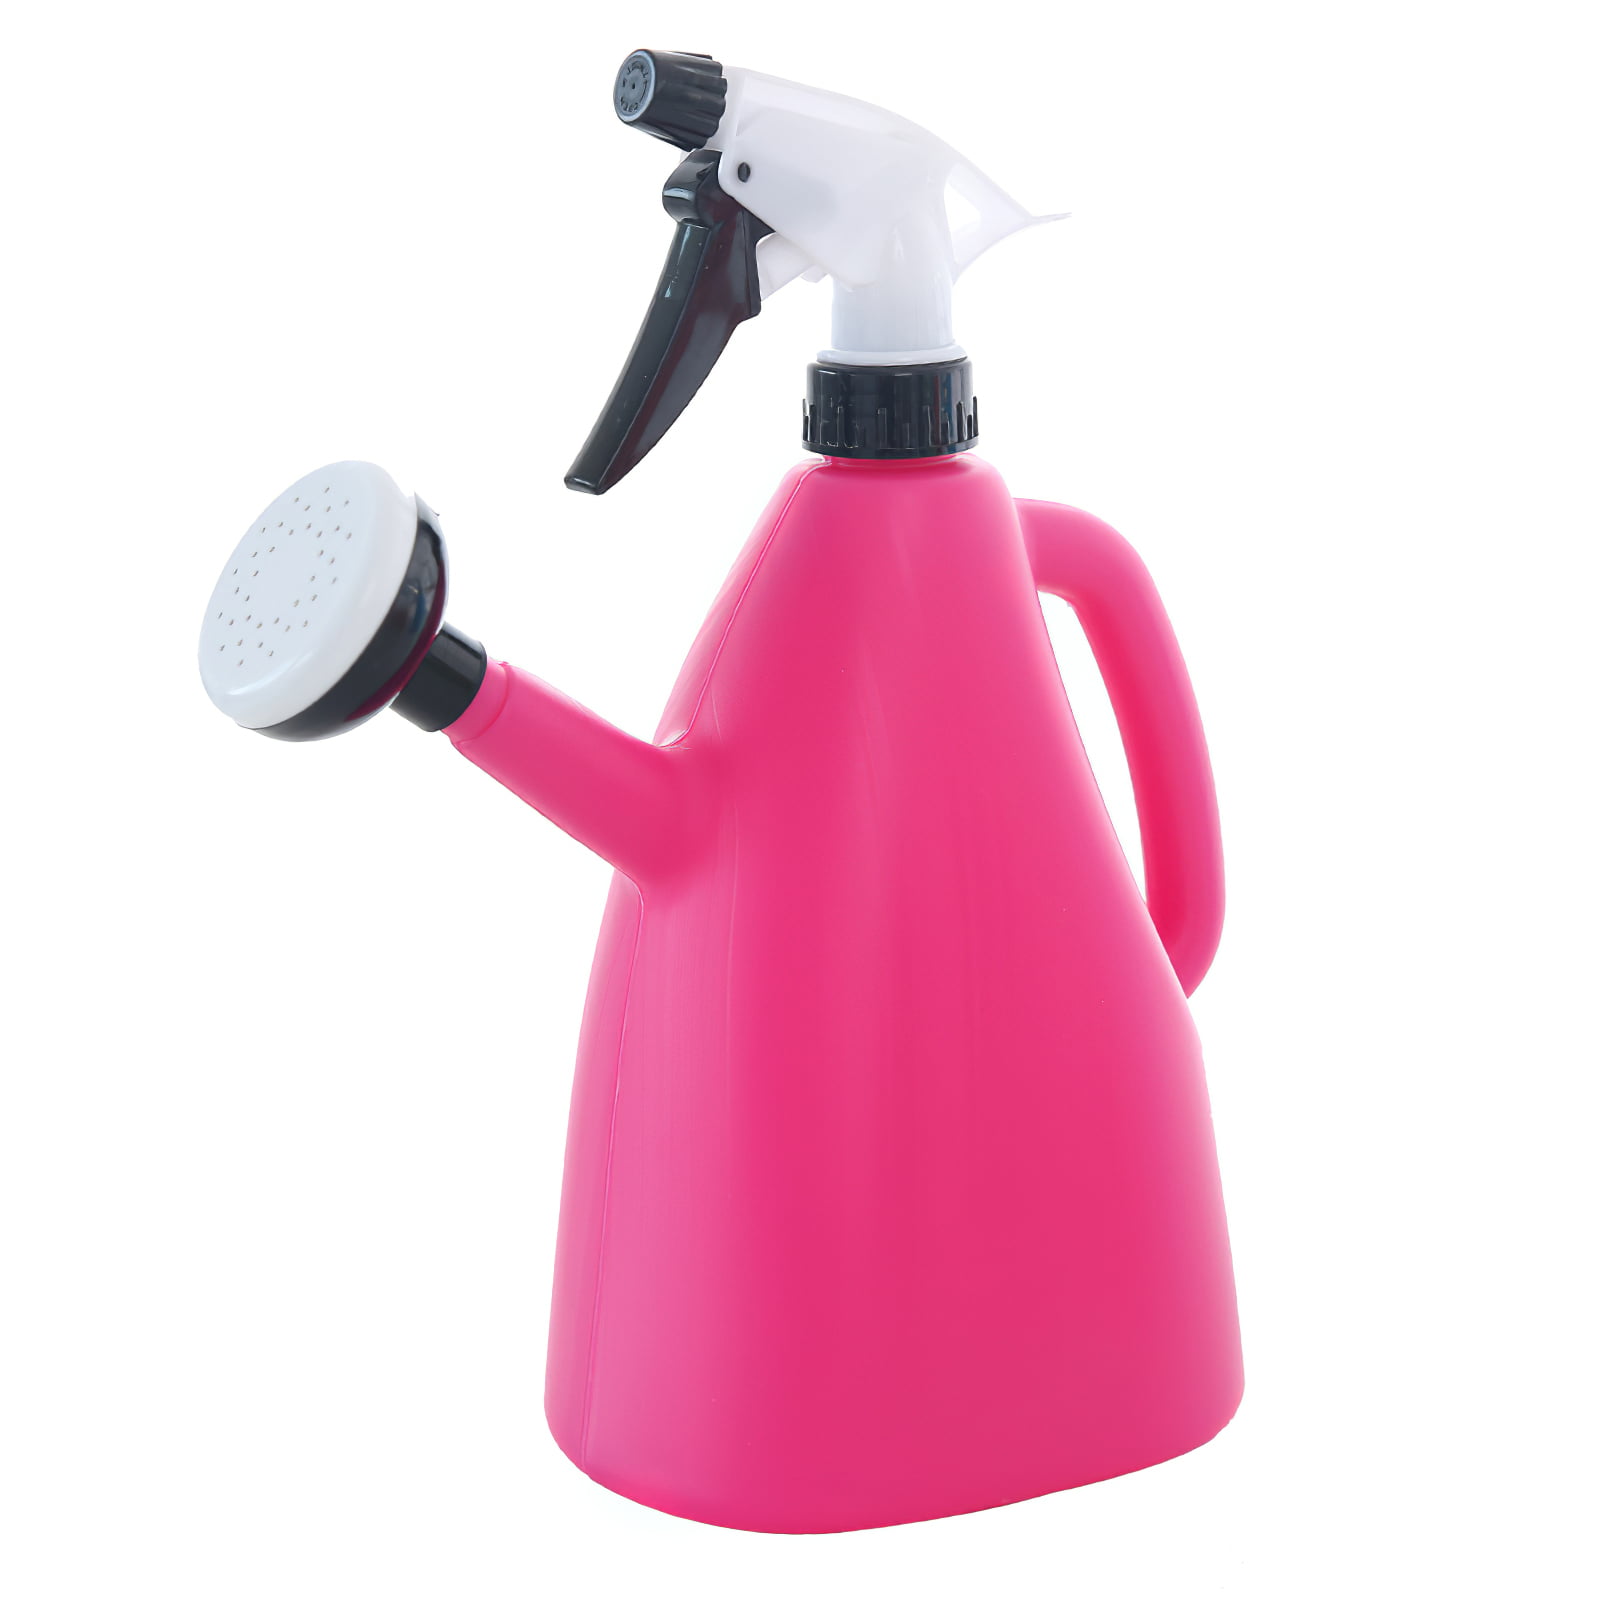 KWEL Car Detailing Unbreakable Empty Spray Bottles Double-Shot  Trigger(Pink)pack of 2 1 L Hand Held Sprayer Price in India - Buy KWEL Car  Detailing Unbreakable Empty Spray Bottles Double-Shot Trigger(Pink)pack of 2